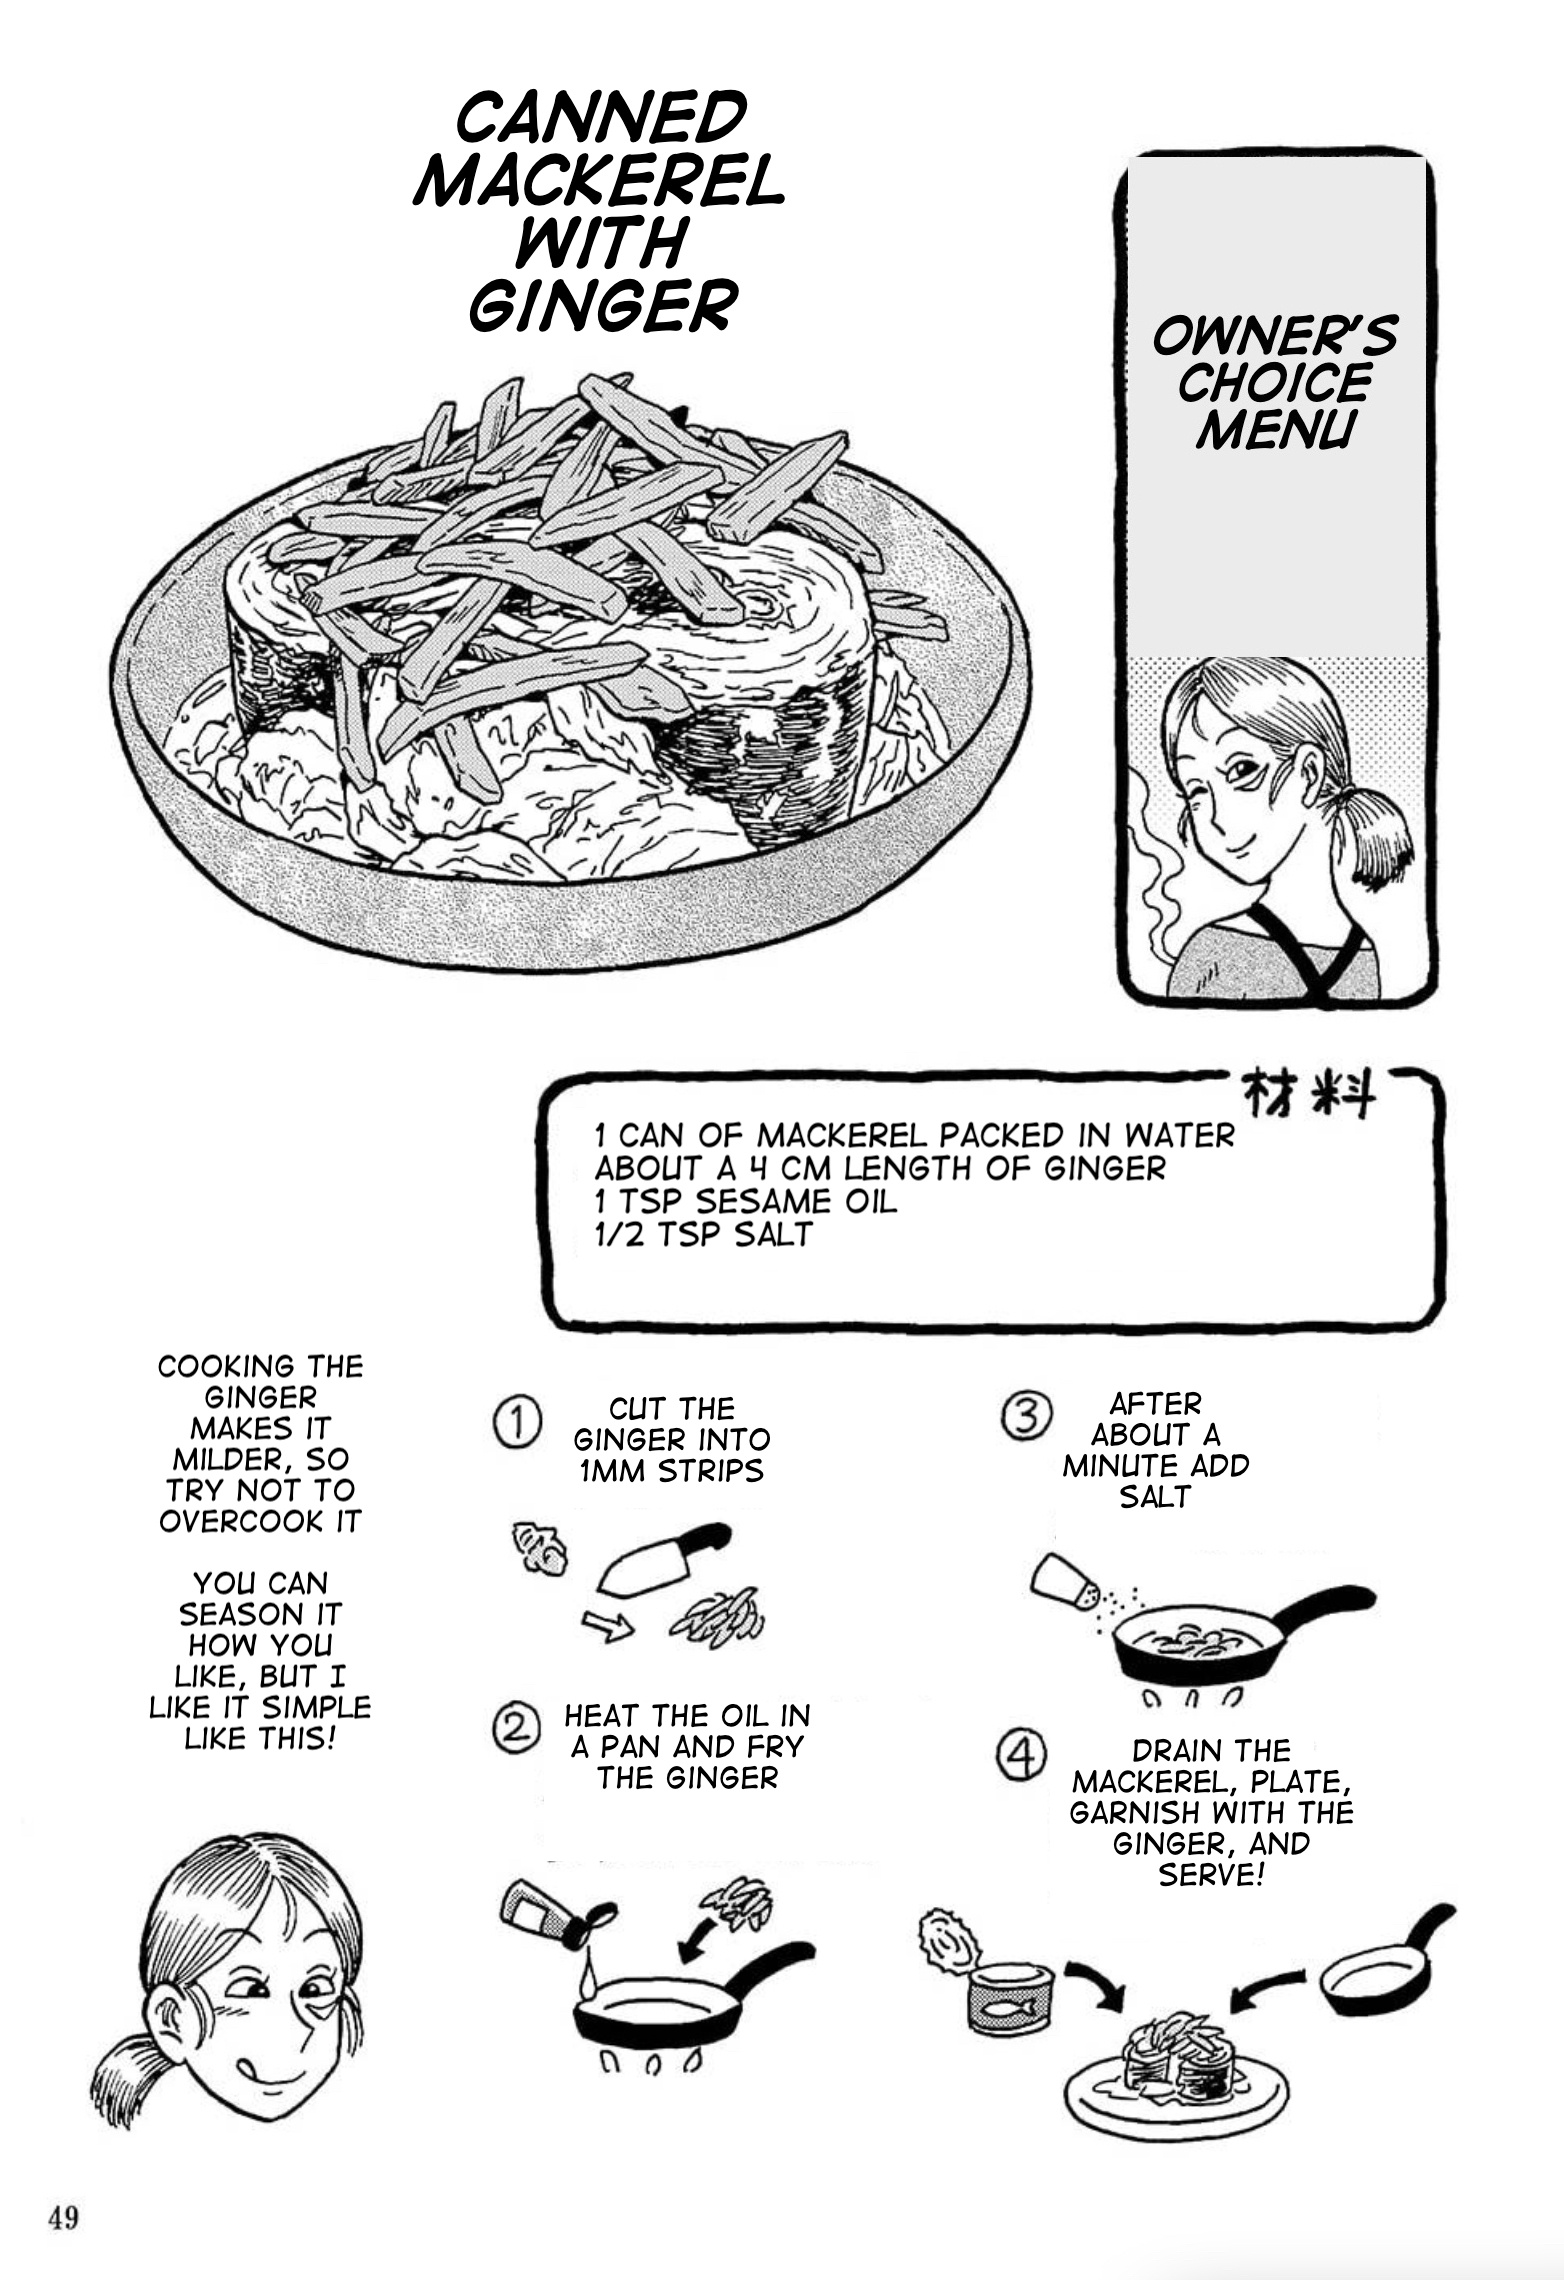 Uramachi Sakaba Vol.3 Chapter 10.1: Owner's Choice Menu: Canned Mackerel With Ginger - Picture 1